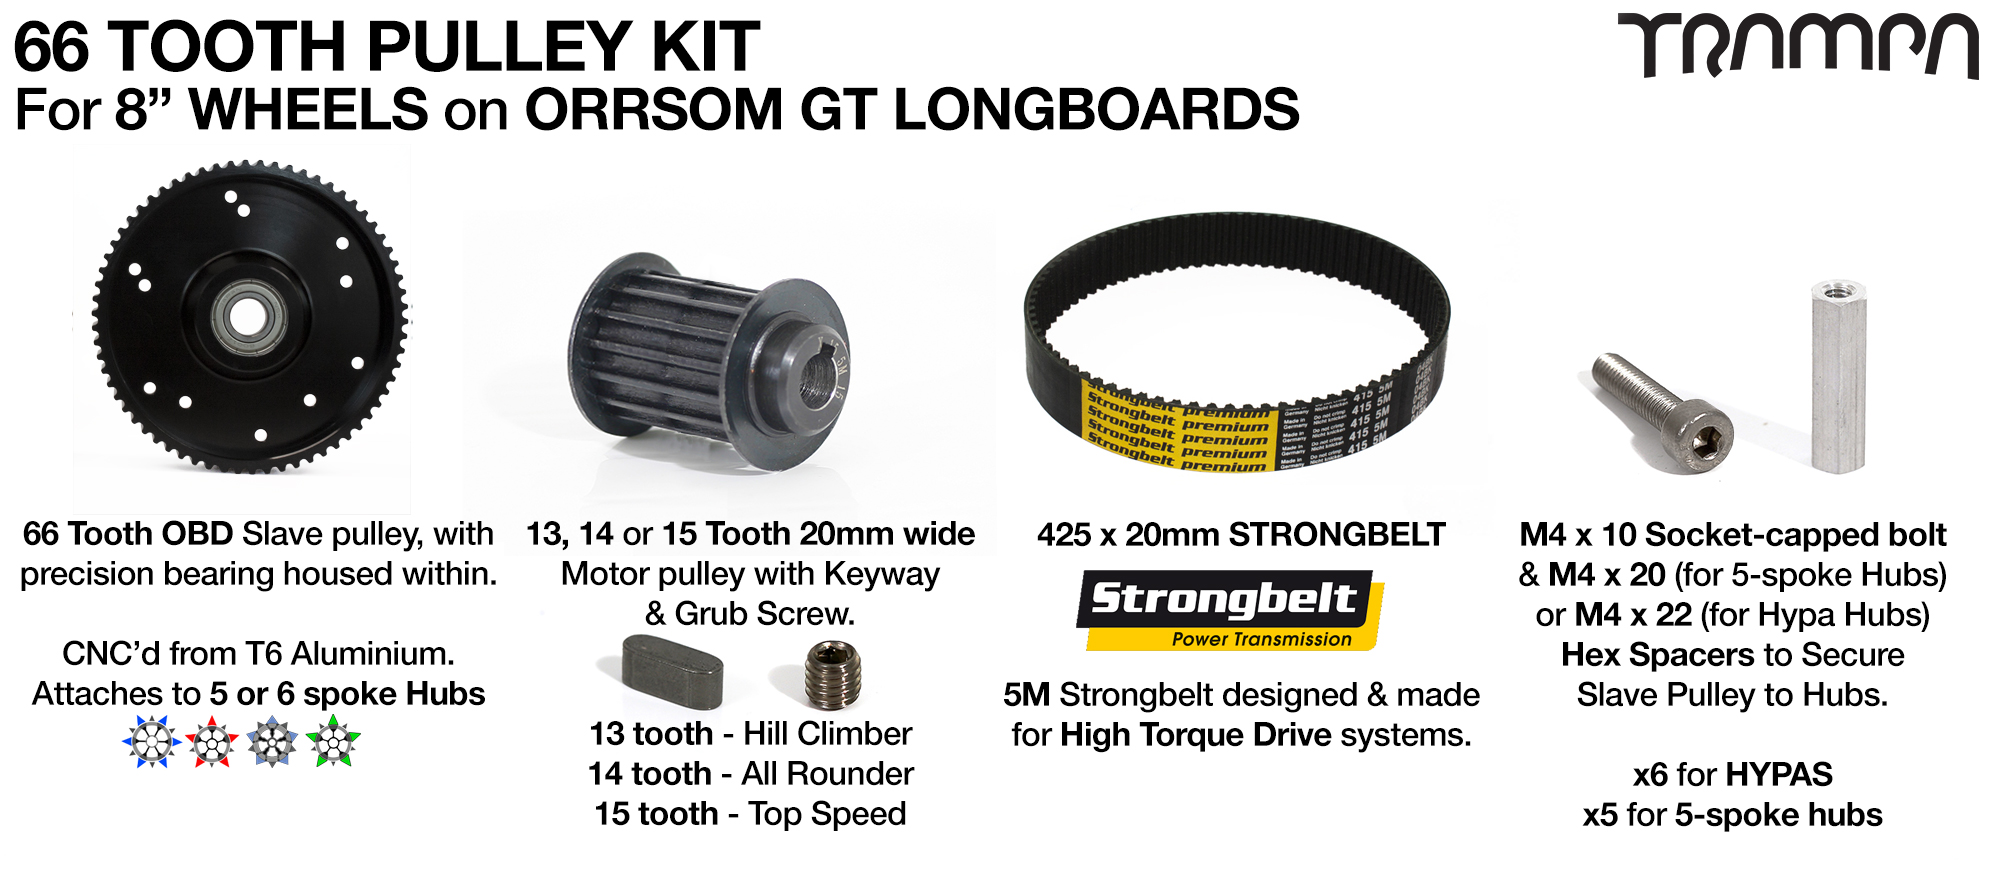 TRAMPA ORRSOM GT Longboard Pulley kit with 66 Tooth Slave & 425mm x 20mm Belt to fit 8 Inch Wheels on to 14FiFties Trucks